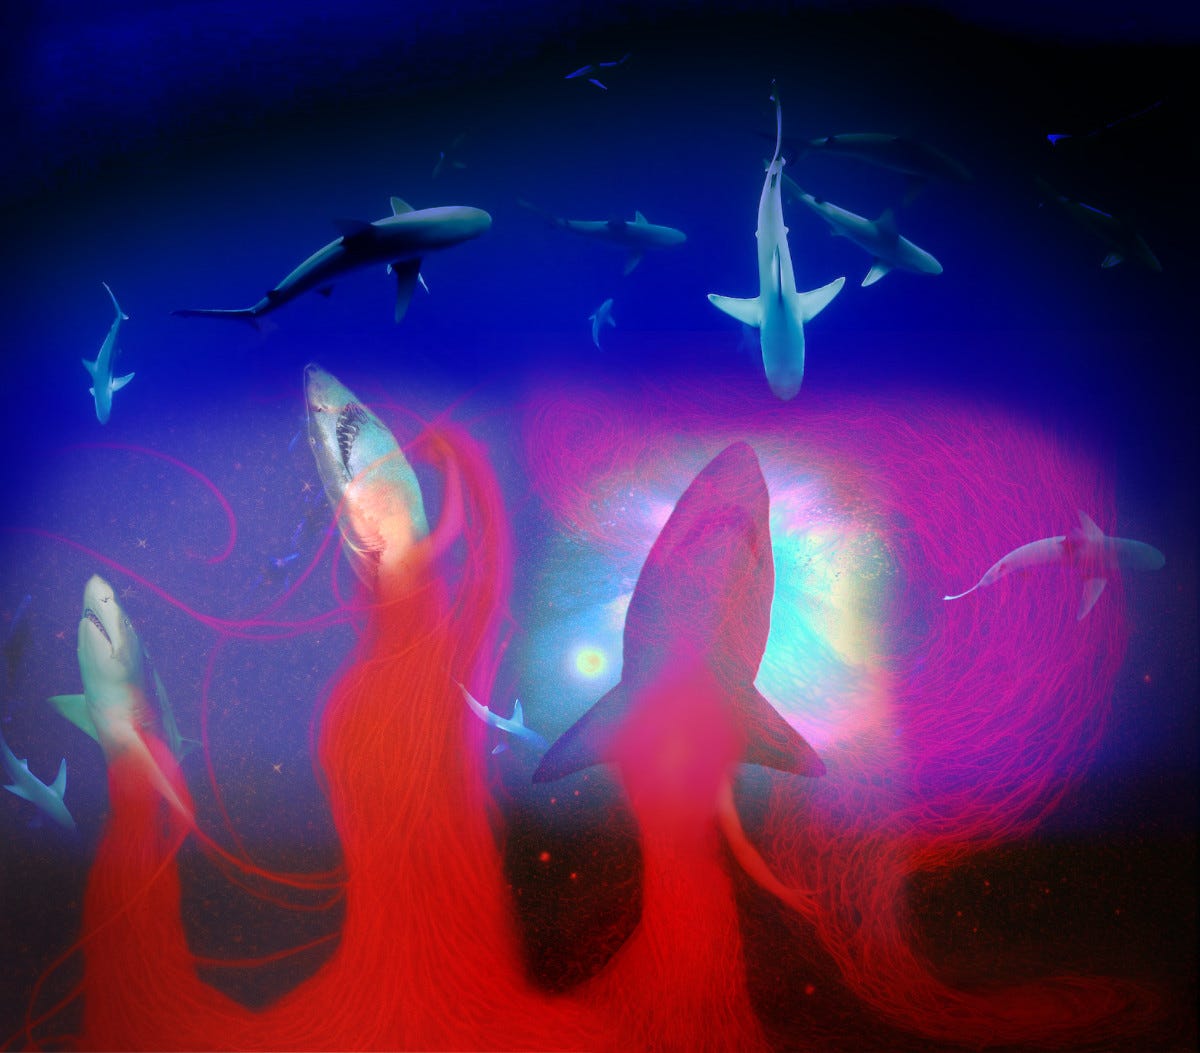 Collage consisting of photographs and AI-generated imagery, showing three shark-headed women in red dresses, against a blue background where other sharks are swimming around